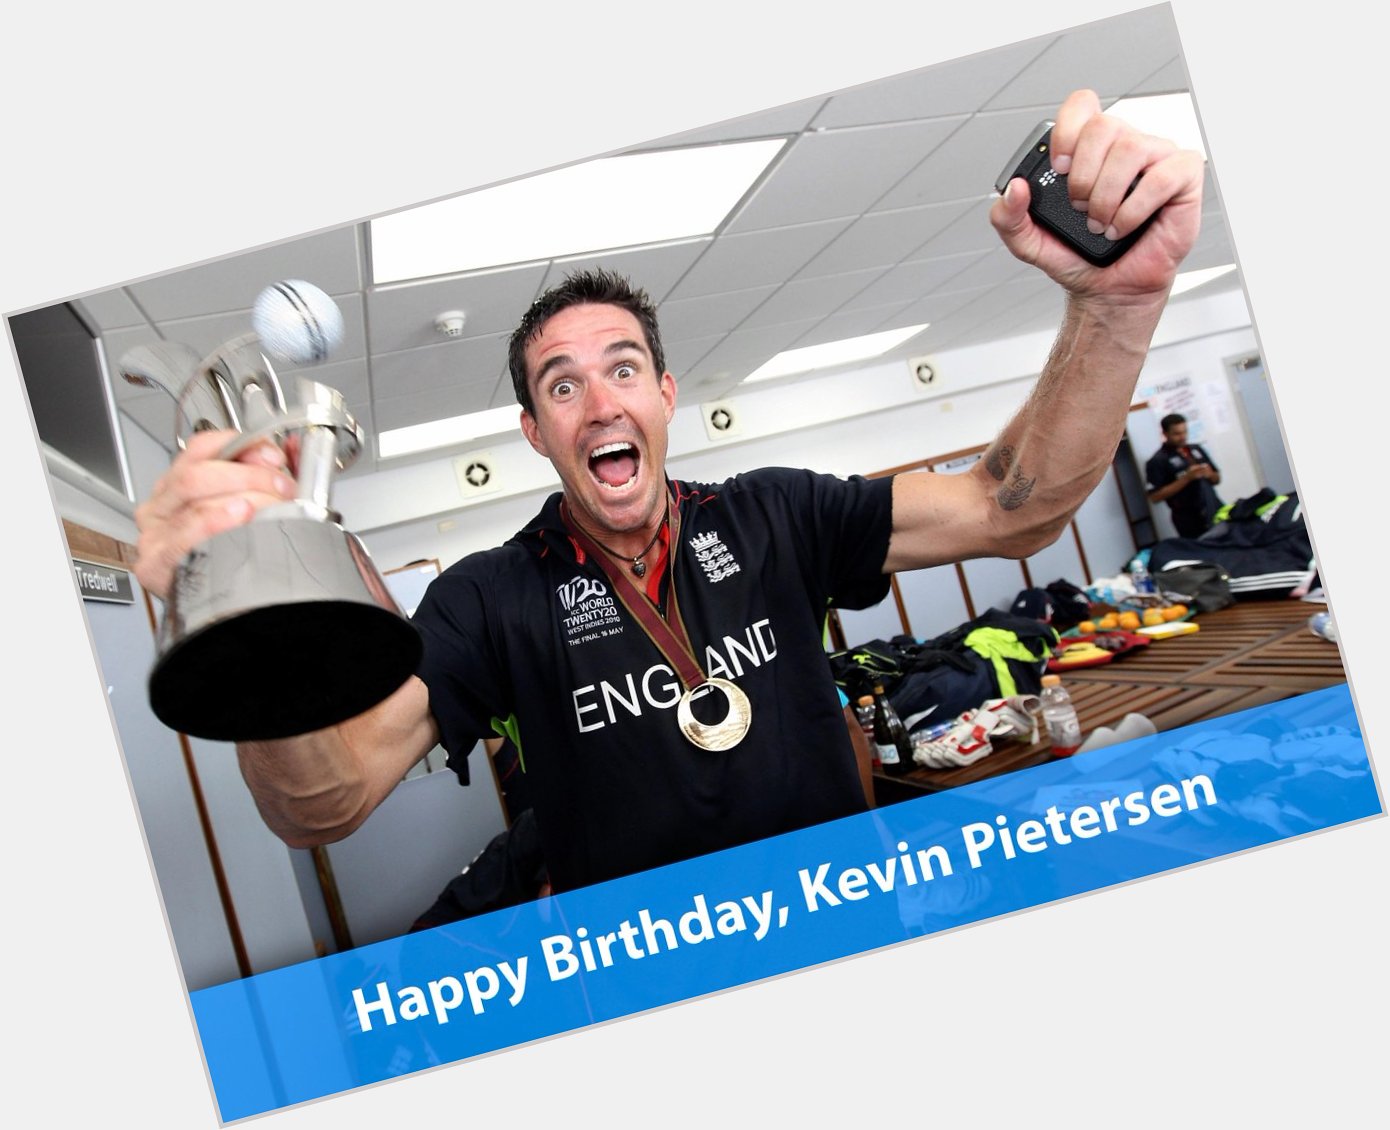  Happy Birthday Kevin Pietersen the fastest to reach 4000
Test runs in terms of days... 